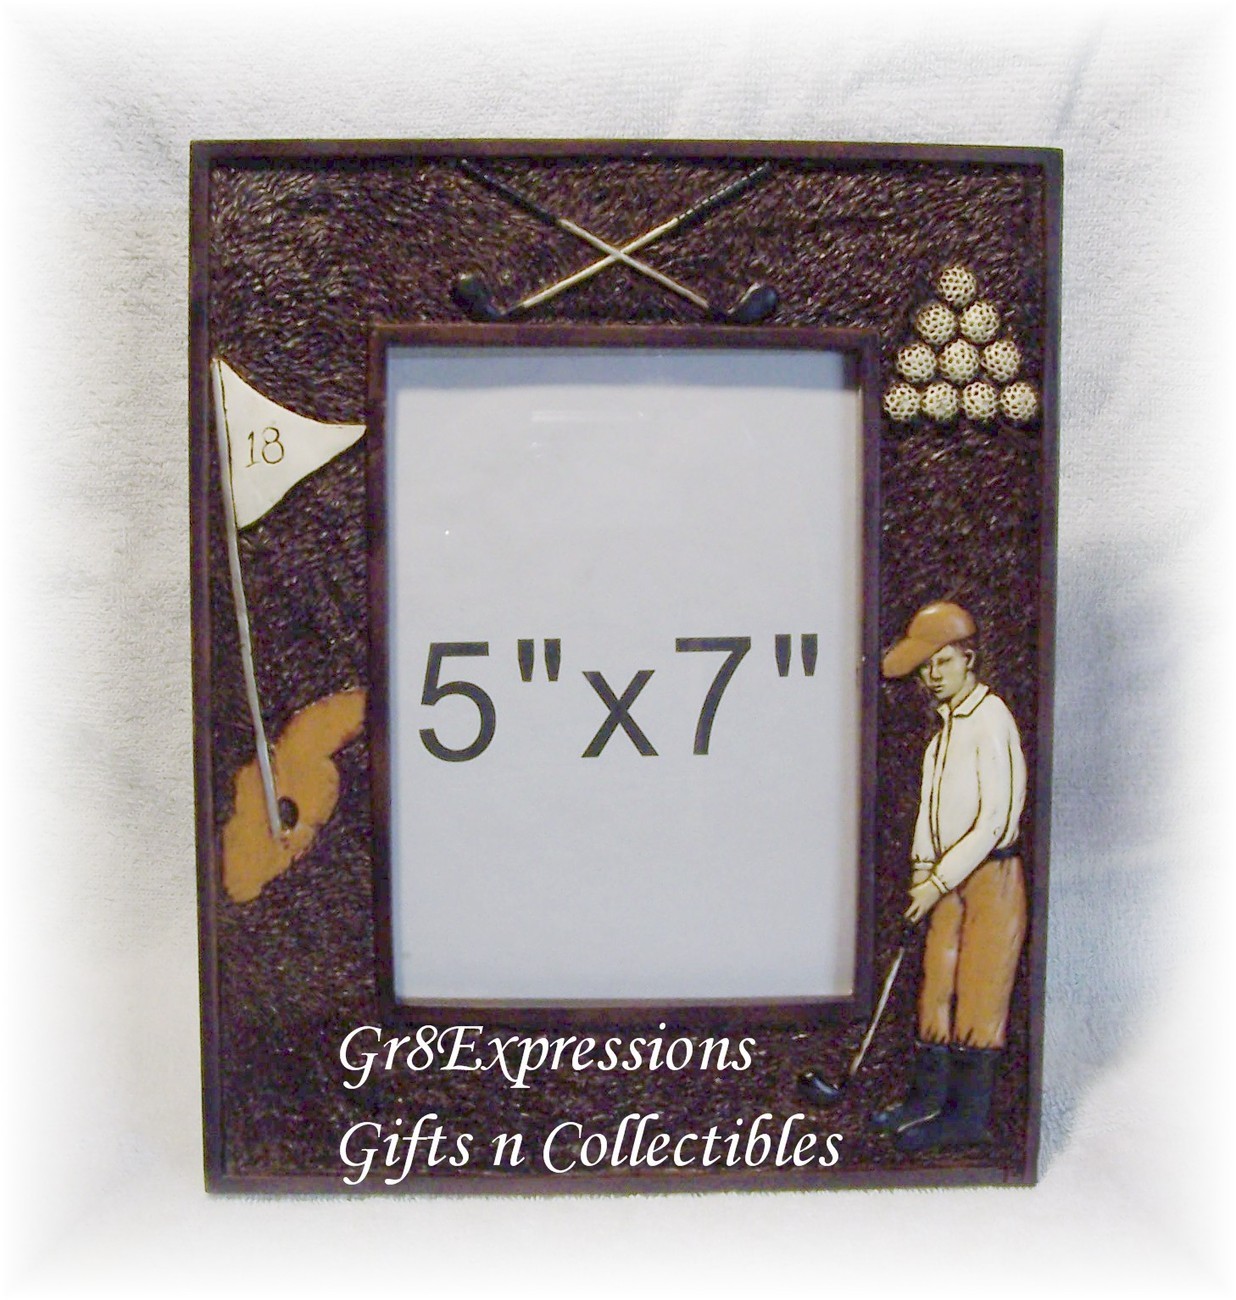 VINTAGE-INSPIRED SEPIA-TONED GOLF PICTURE PHOTO FRAME - $9.95